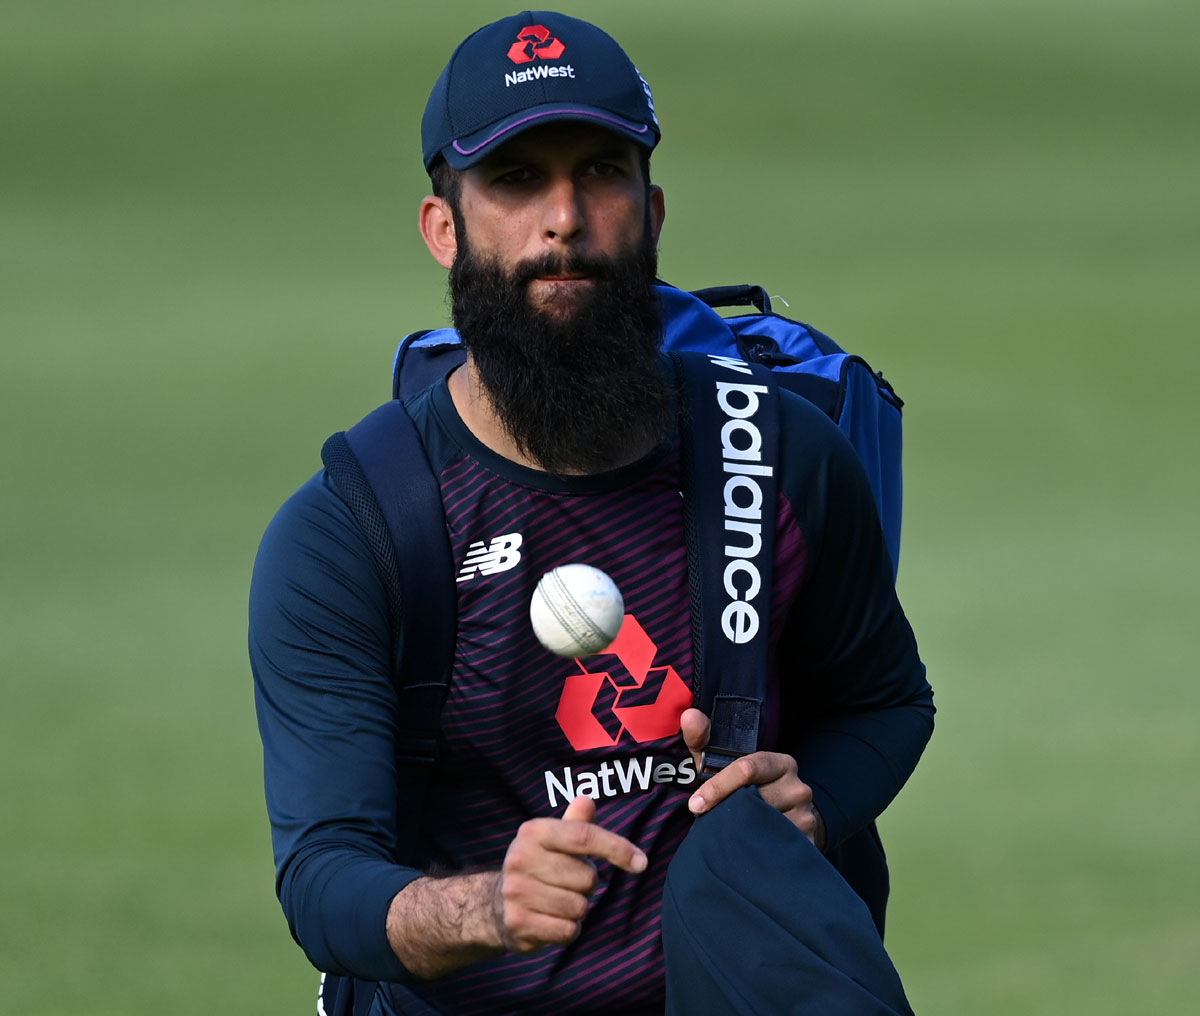 Moeen under consideration for 2nd Test: Silverwood